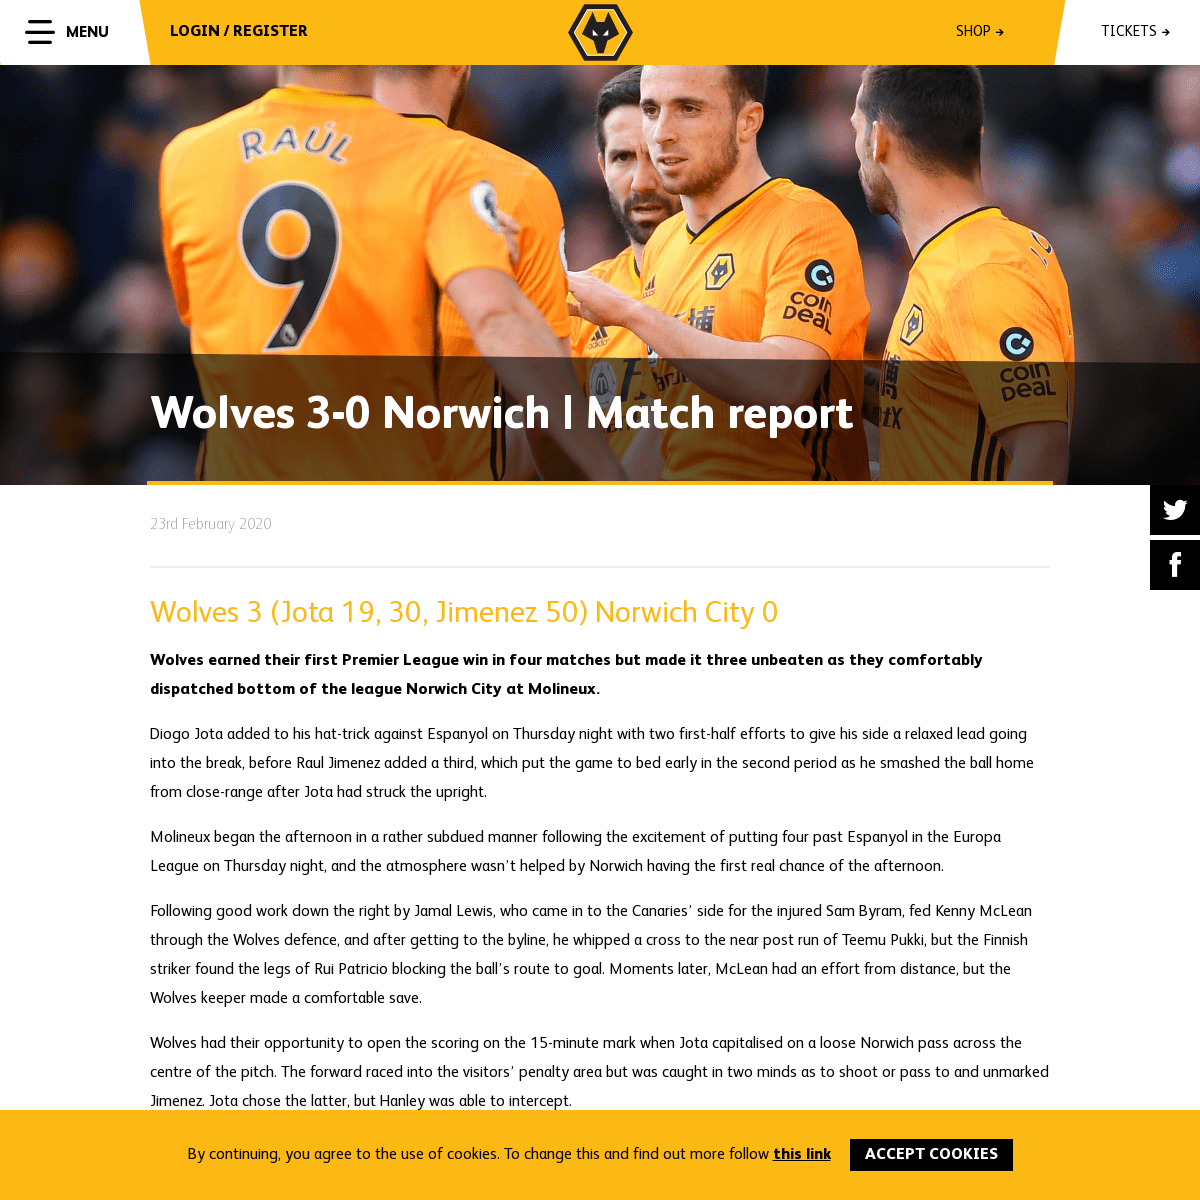 A complete backup of www.wolves.co.uk/news/first-team/20200223-wolves-3-0-norwich-match-report/